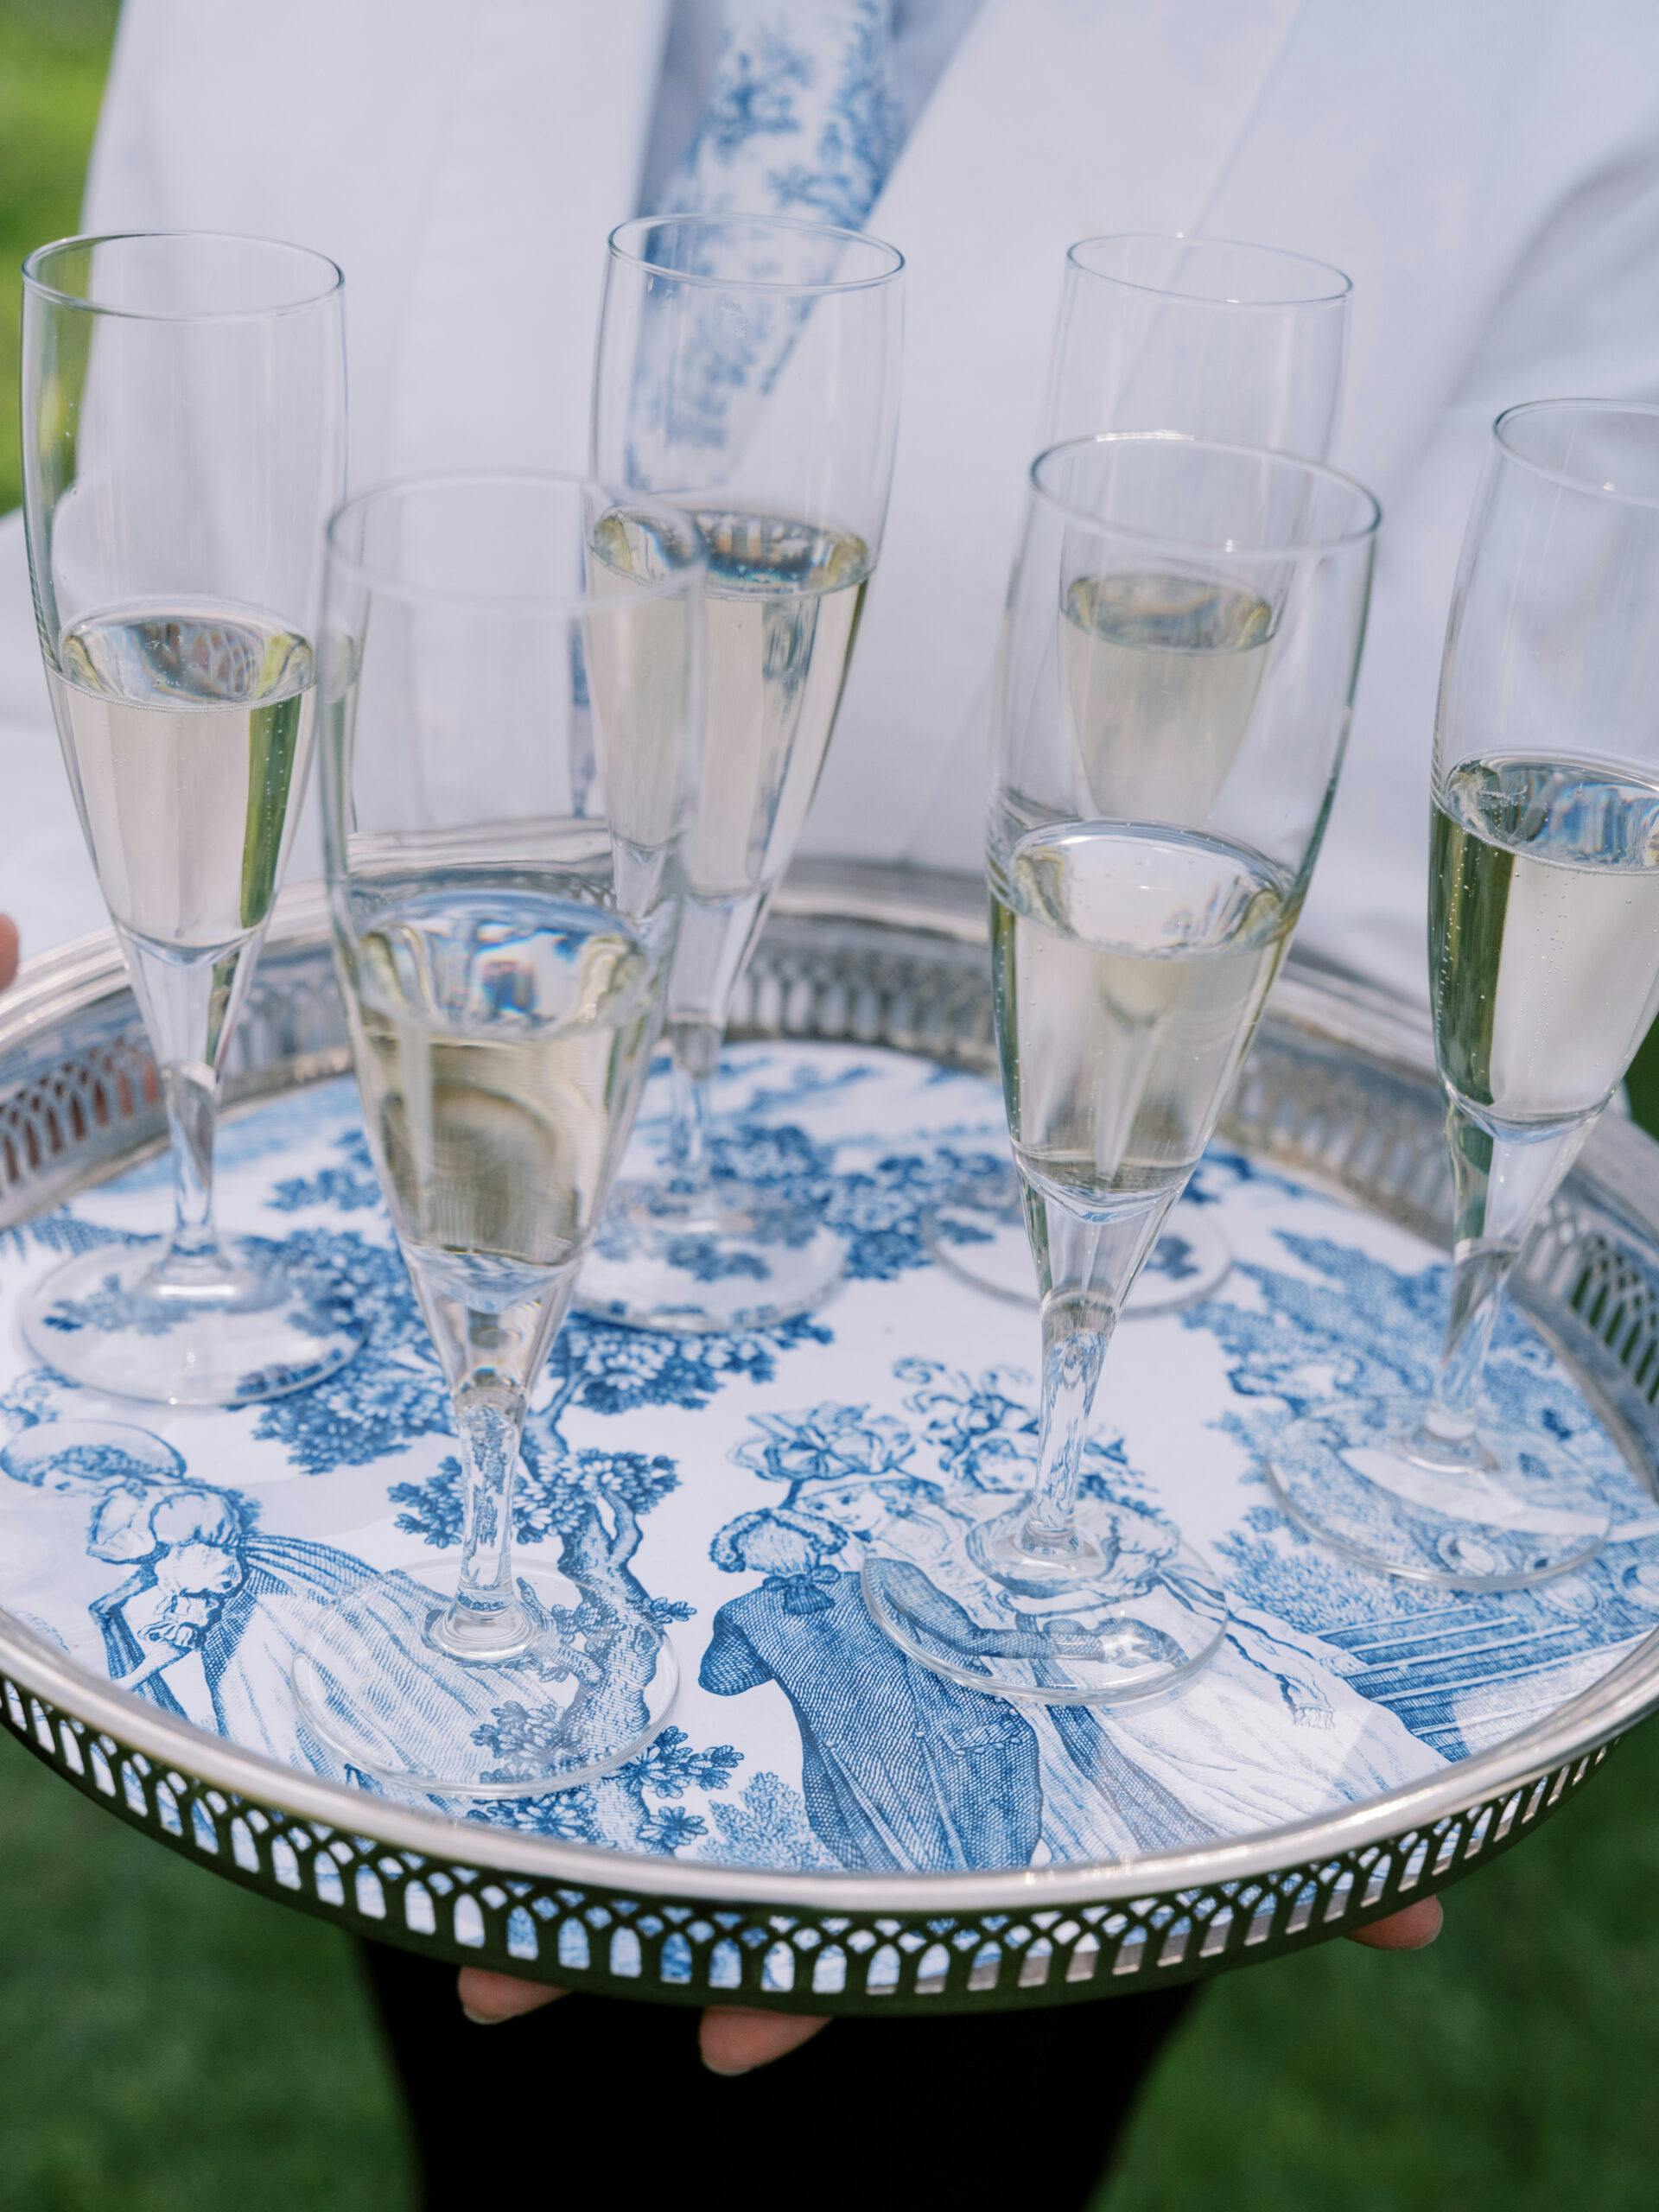 Timeless Wedding at The Woodlawn Estate in Washington, D.C.